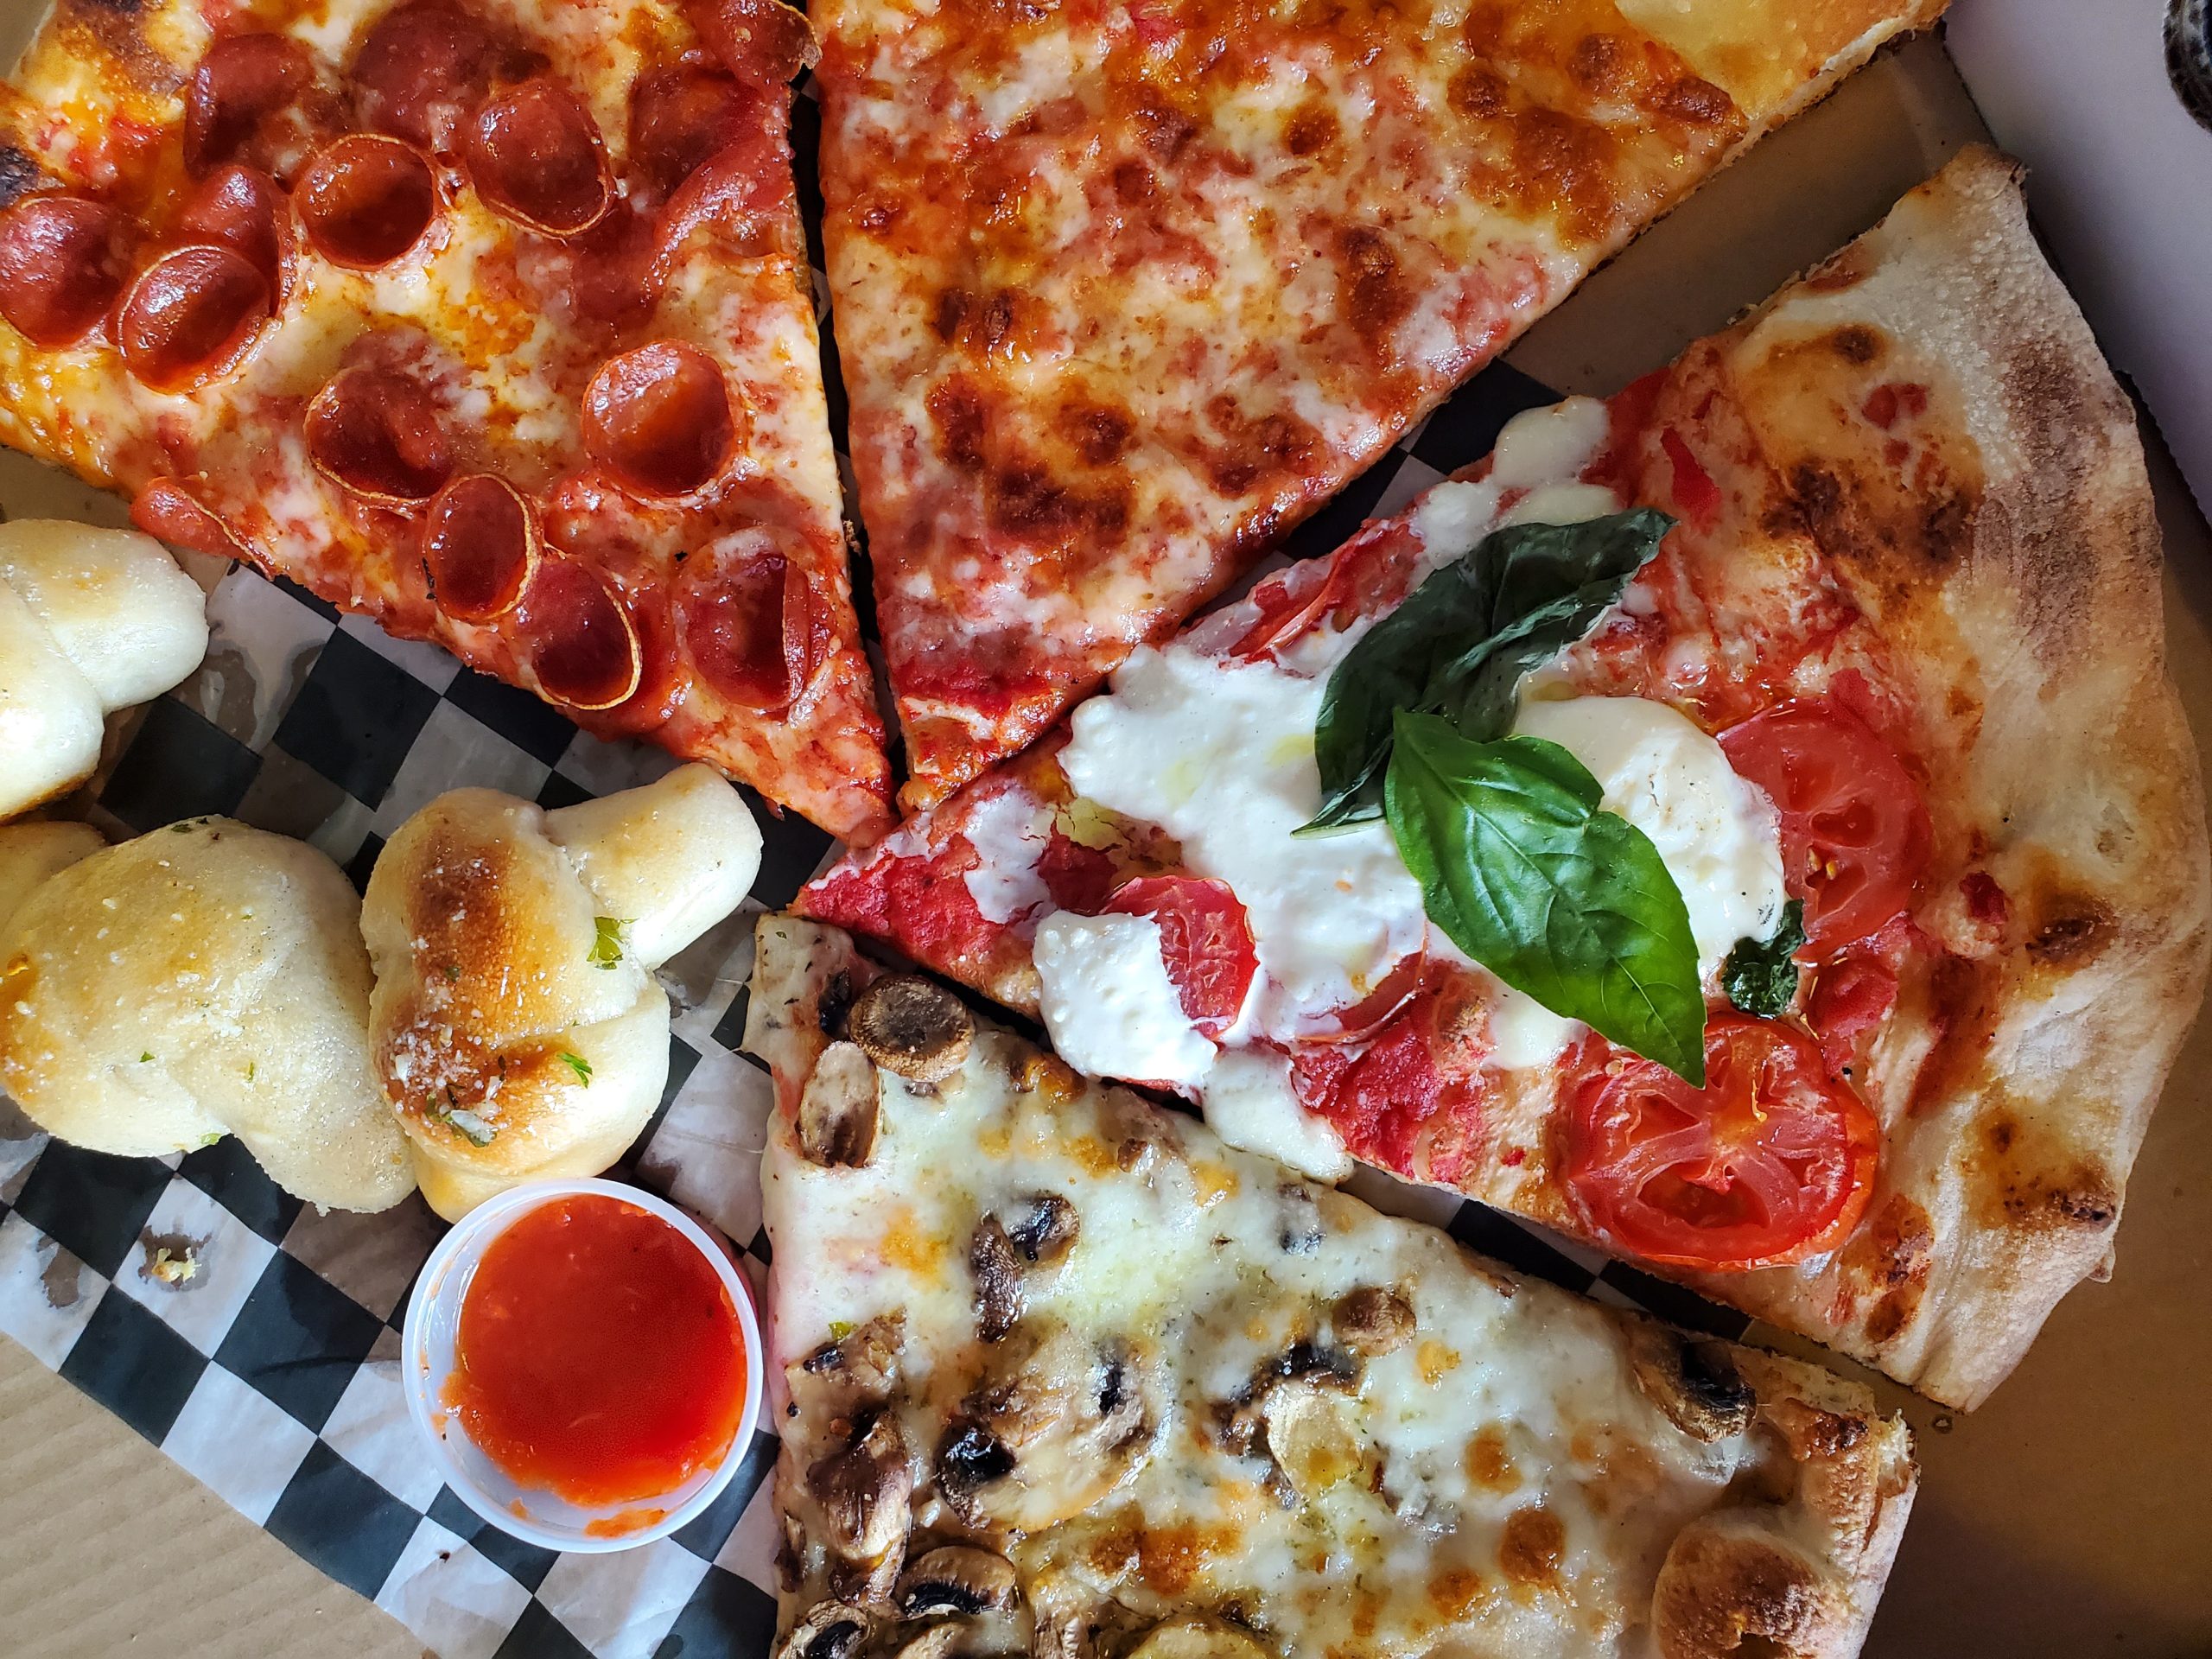 Slices of cheese, pepperoni, and burrata pizza from Slice & Pie